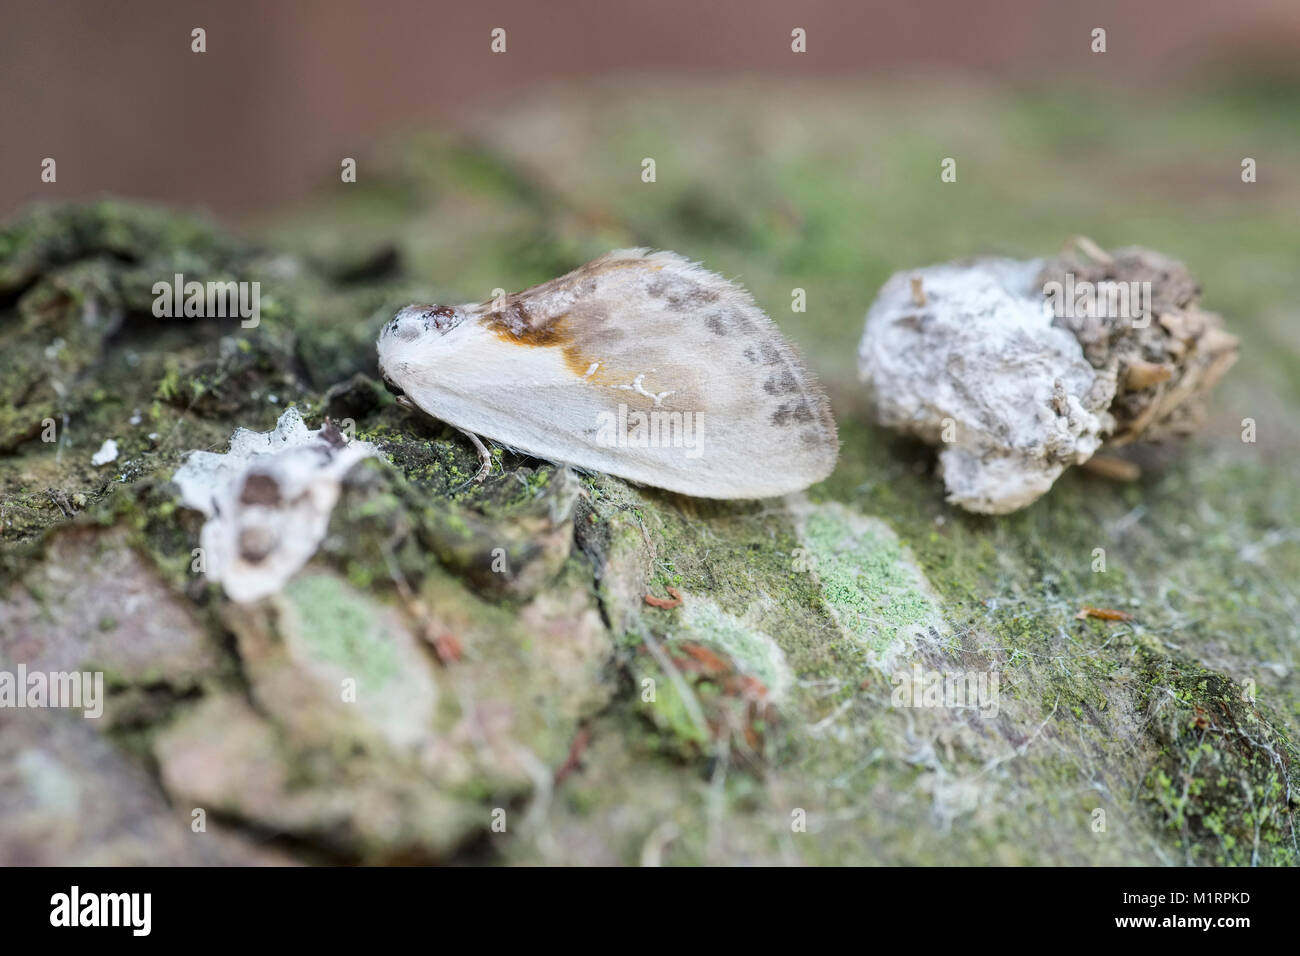 Chinese character moth resting next to bird droppings showing  camouflage or mimicry - Cilix glaucata Stock Photo